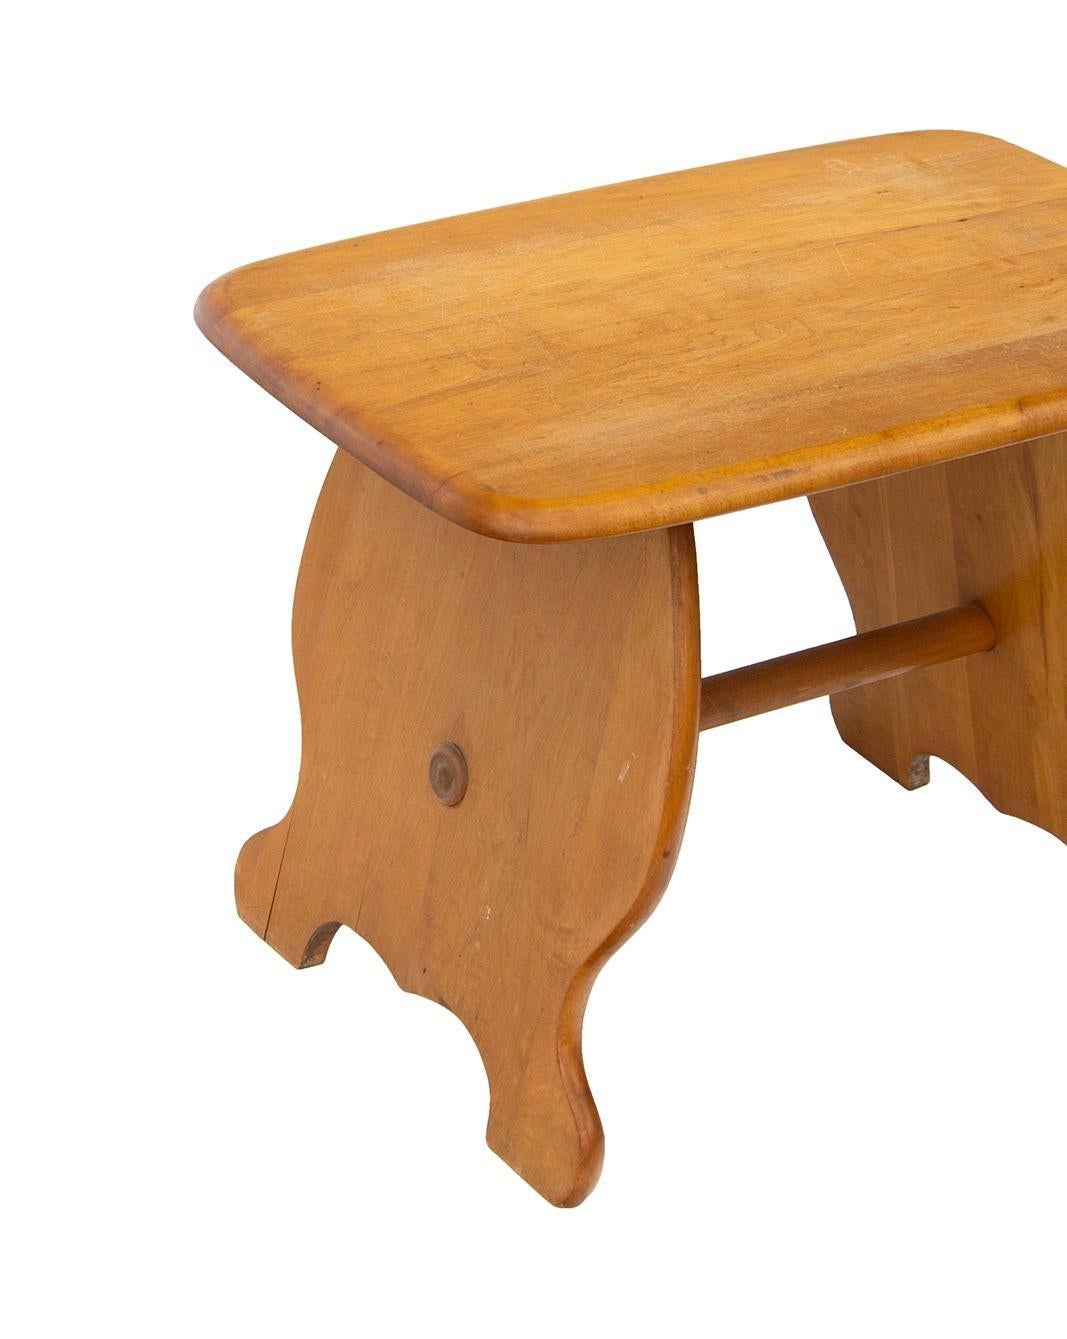 USA, 1950s
Whimsical solid maple bench or stool. Great form from the legs to the stretcher and the top. Warm solid maple.
CONDITION NOTES: In overall good condition with some light marks and age appropriate wear.
DIMENSIONS: 29